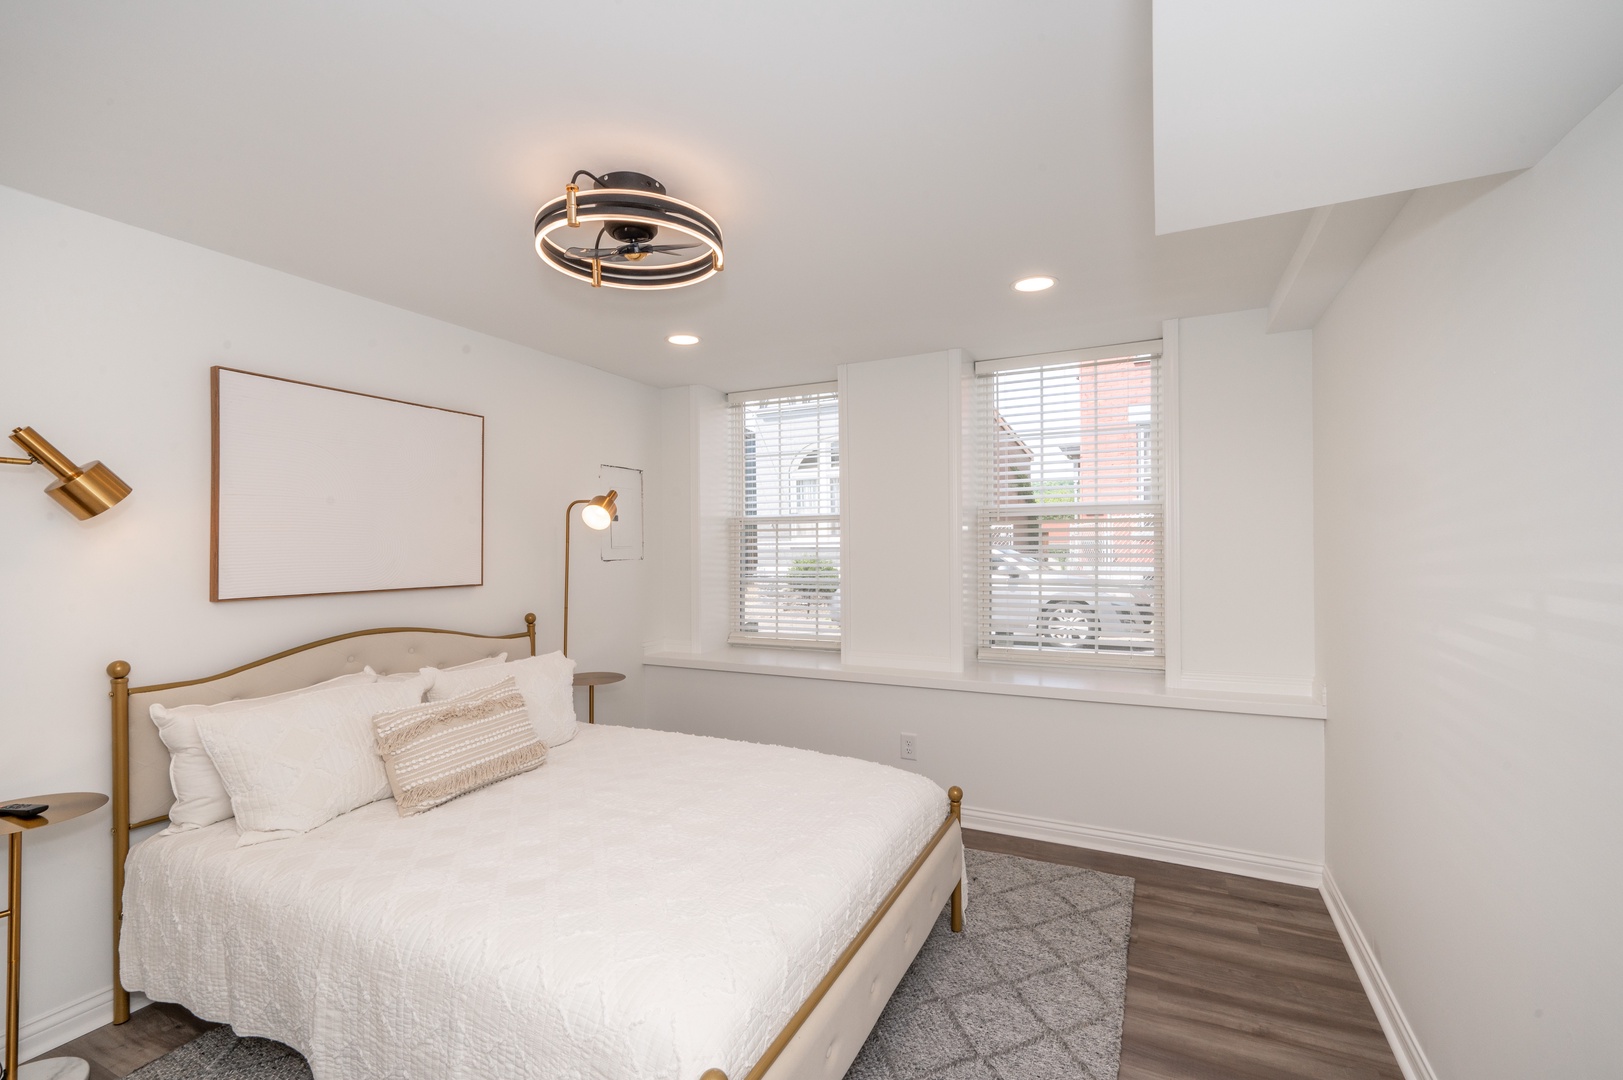 Unit 101: The tranquil queen bedroom offers a large closet & ceiling fan